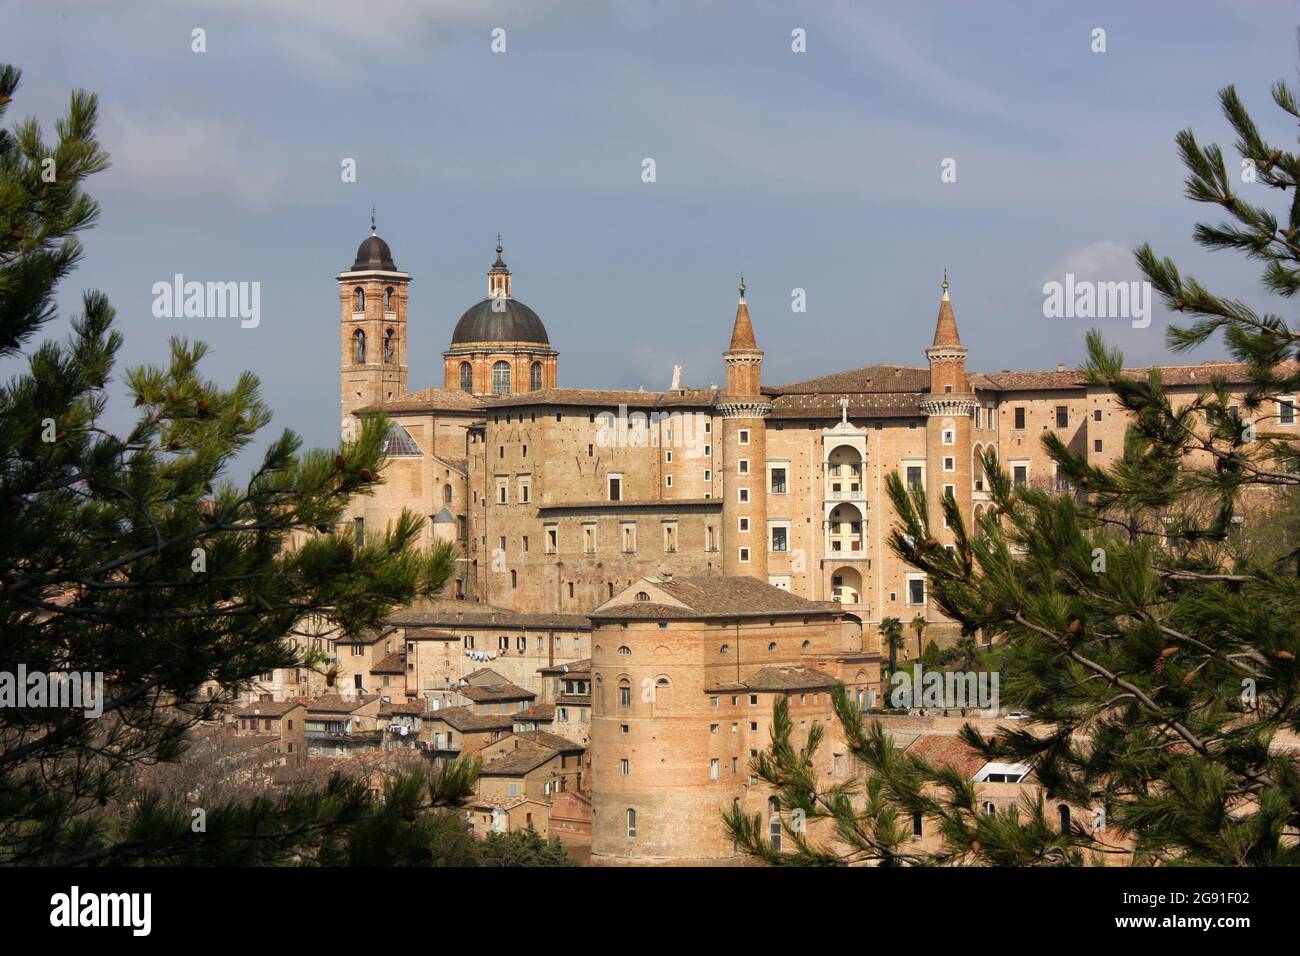 Urbino is a walled city in the center of Italy, a World Heritage Site notable for a remarkable historical legacy of independent Renaissance culture, e Stock Photo